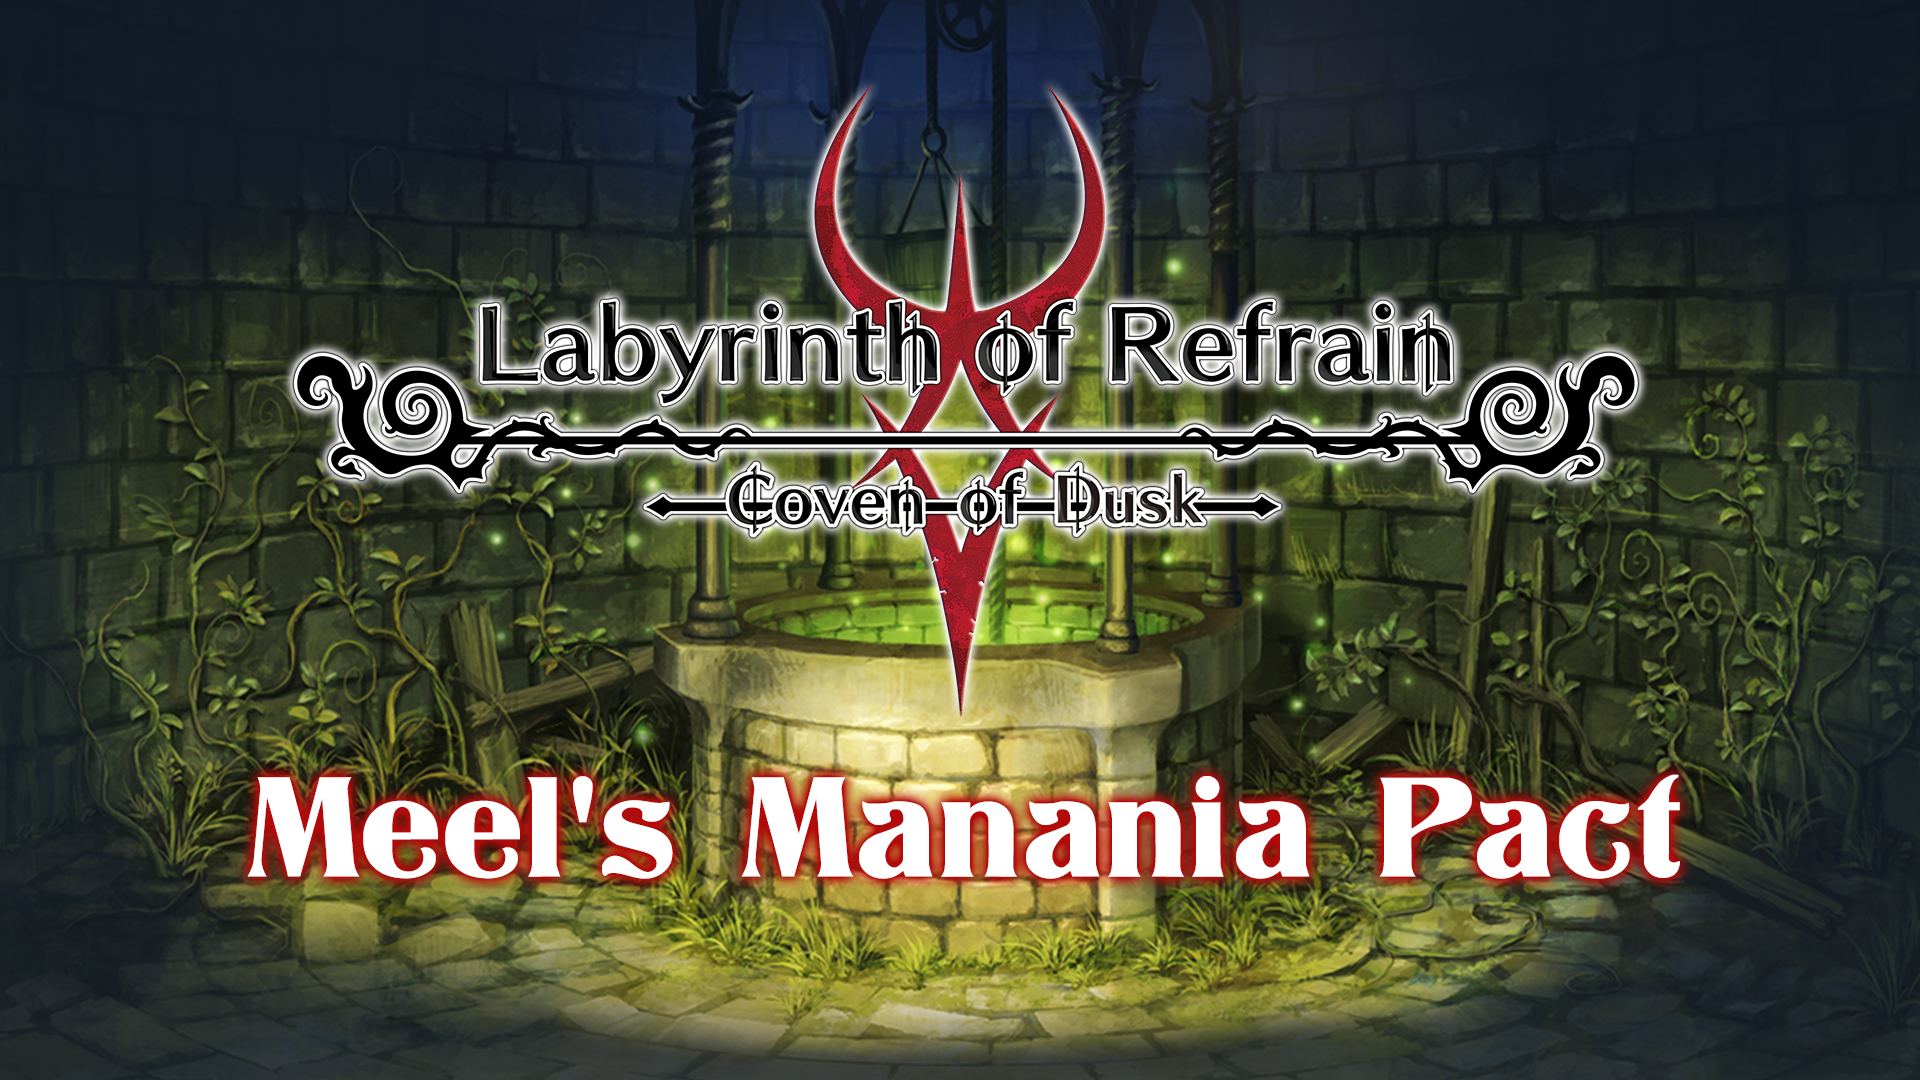 Labyrinth of Refrain: Coven of Dusk - Meel's Manania Pact Featured Screenshot #1